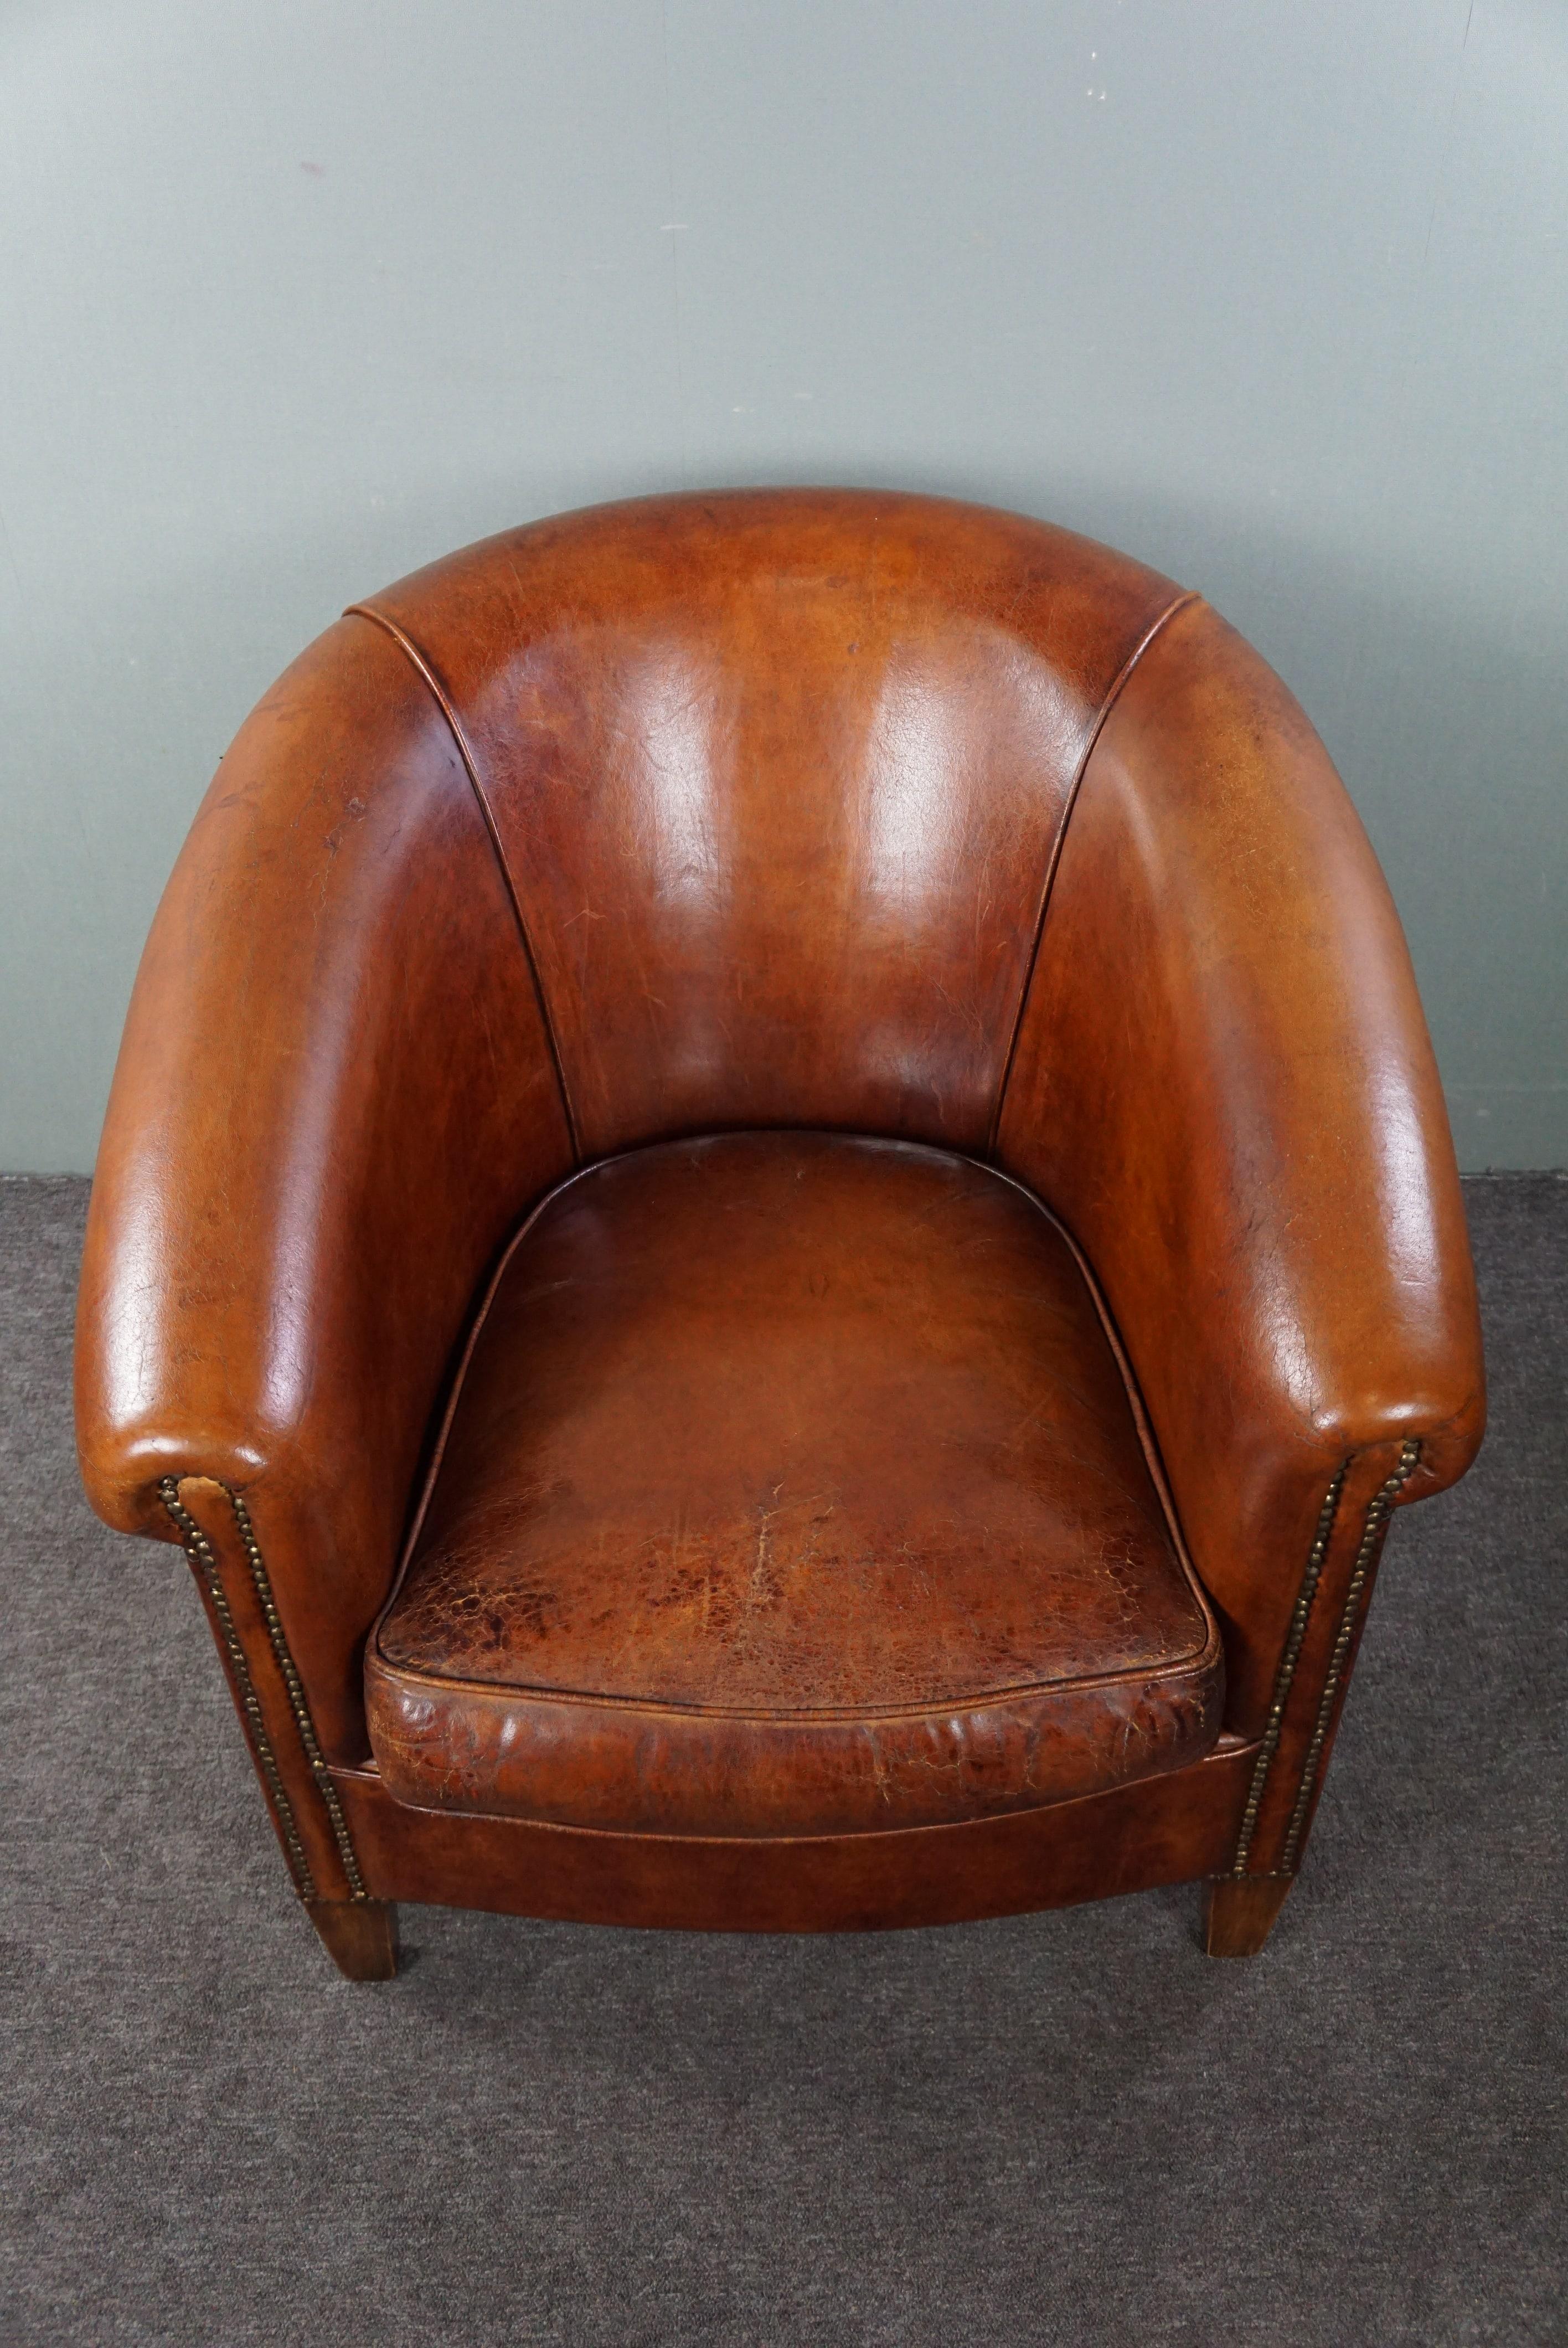 Leather Comfortable sheep leather club armchair in a warm cognac/chestnut color For Sale